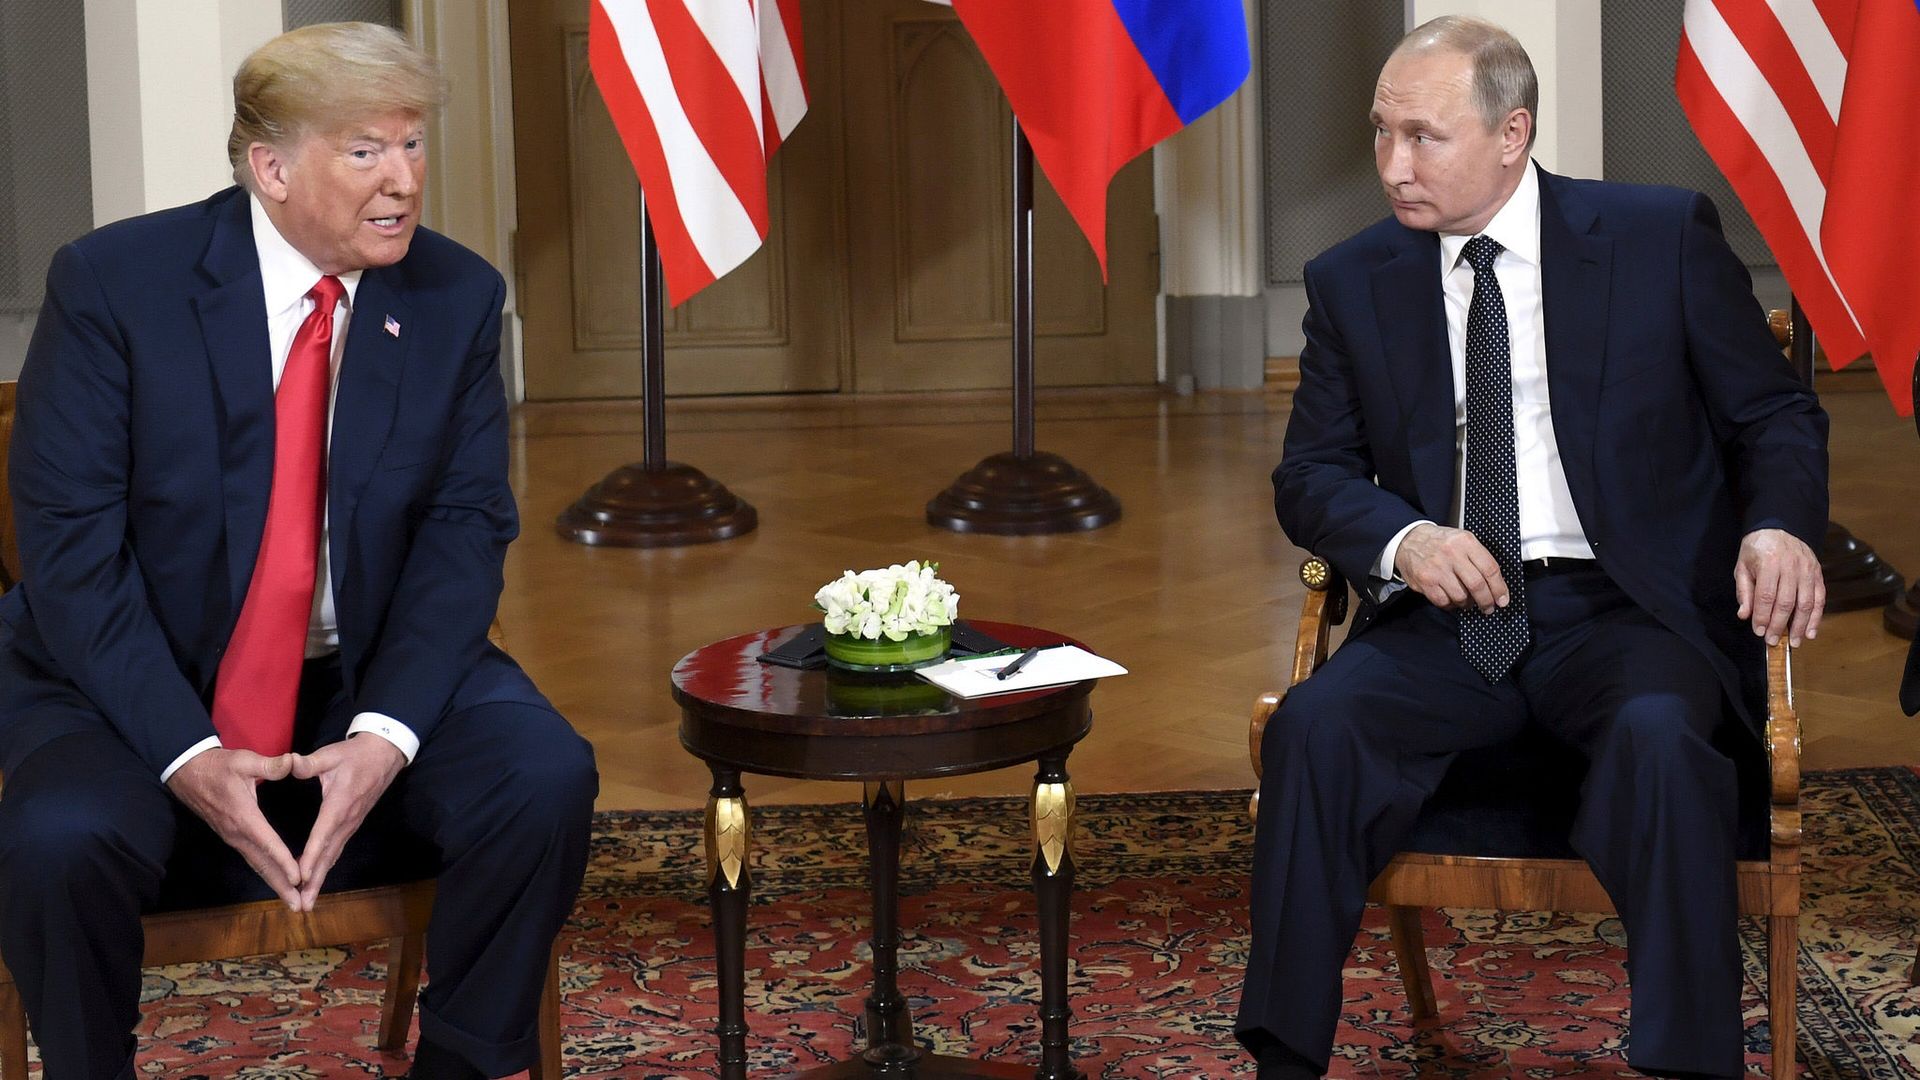 President trump and President putin sitting in chairs next to each other. 